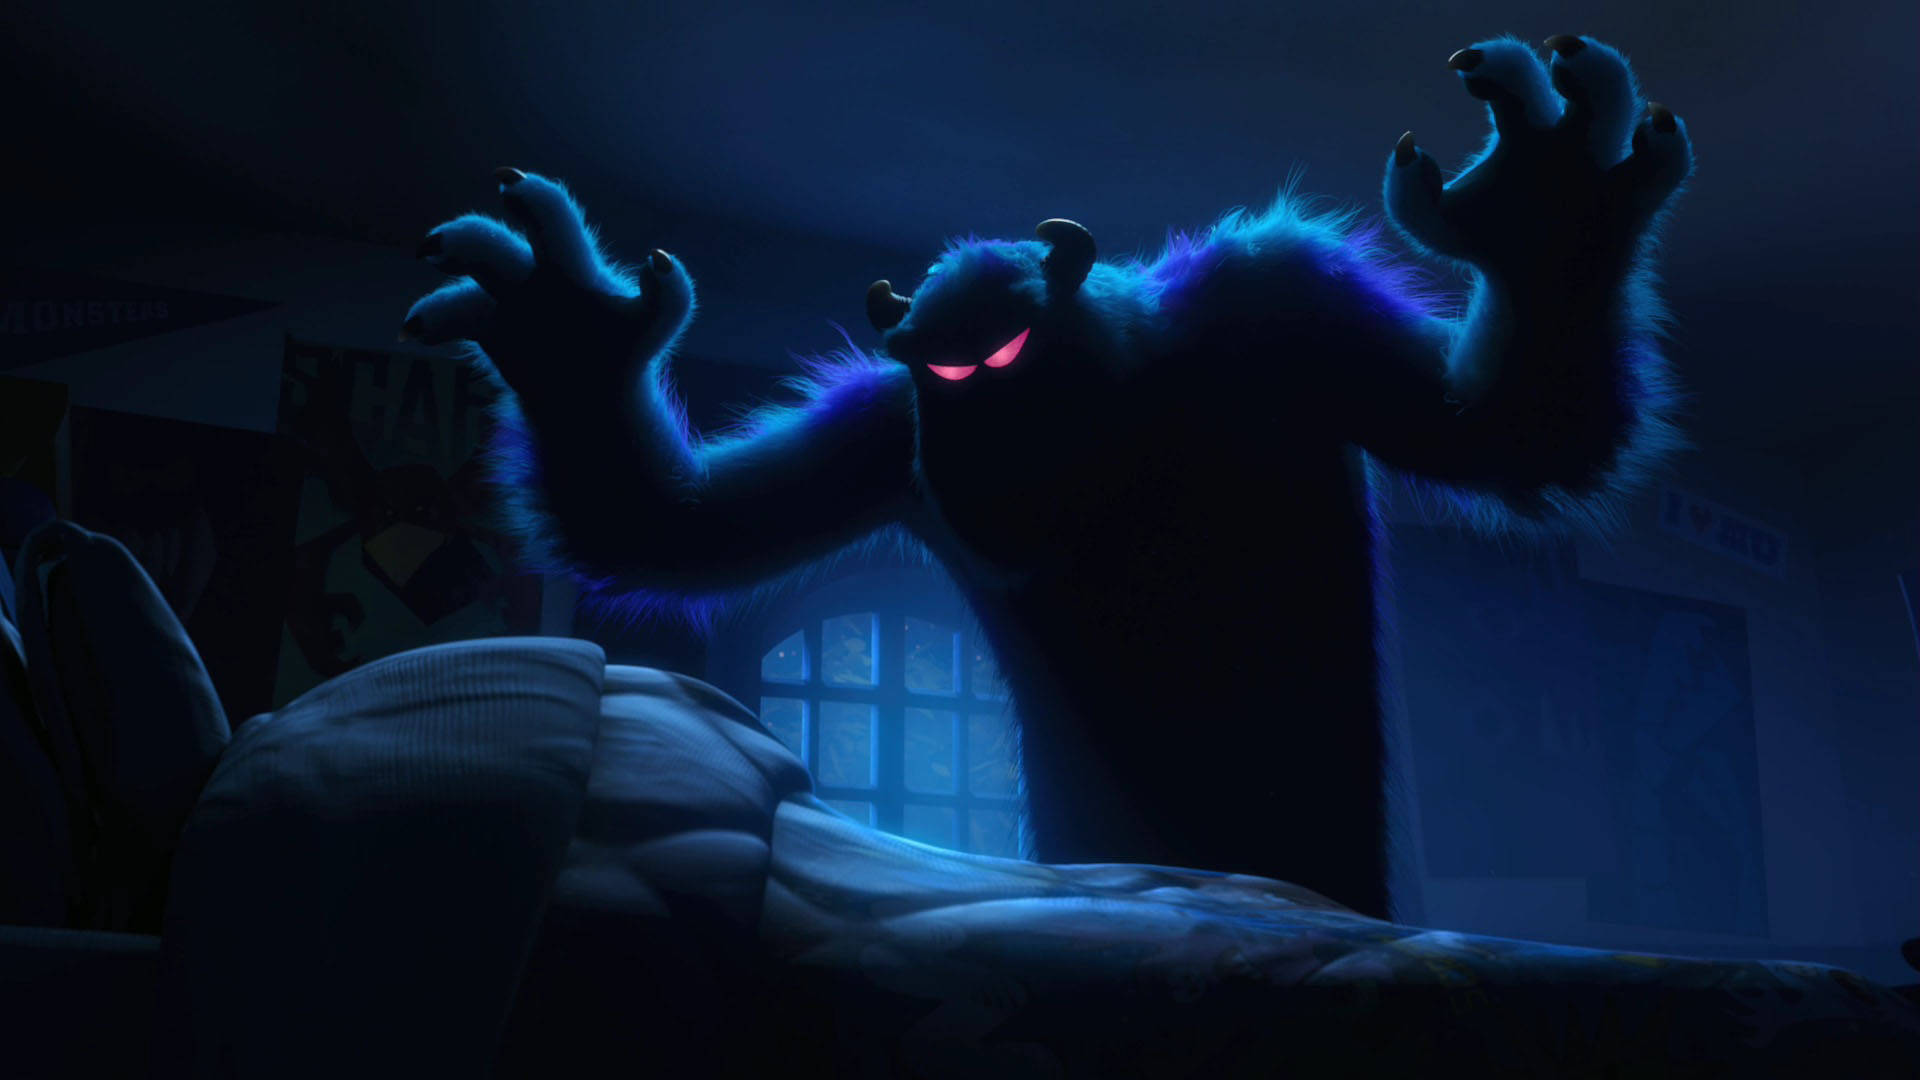 Sulley The Top Scarer